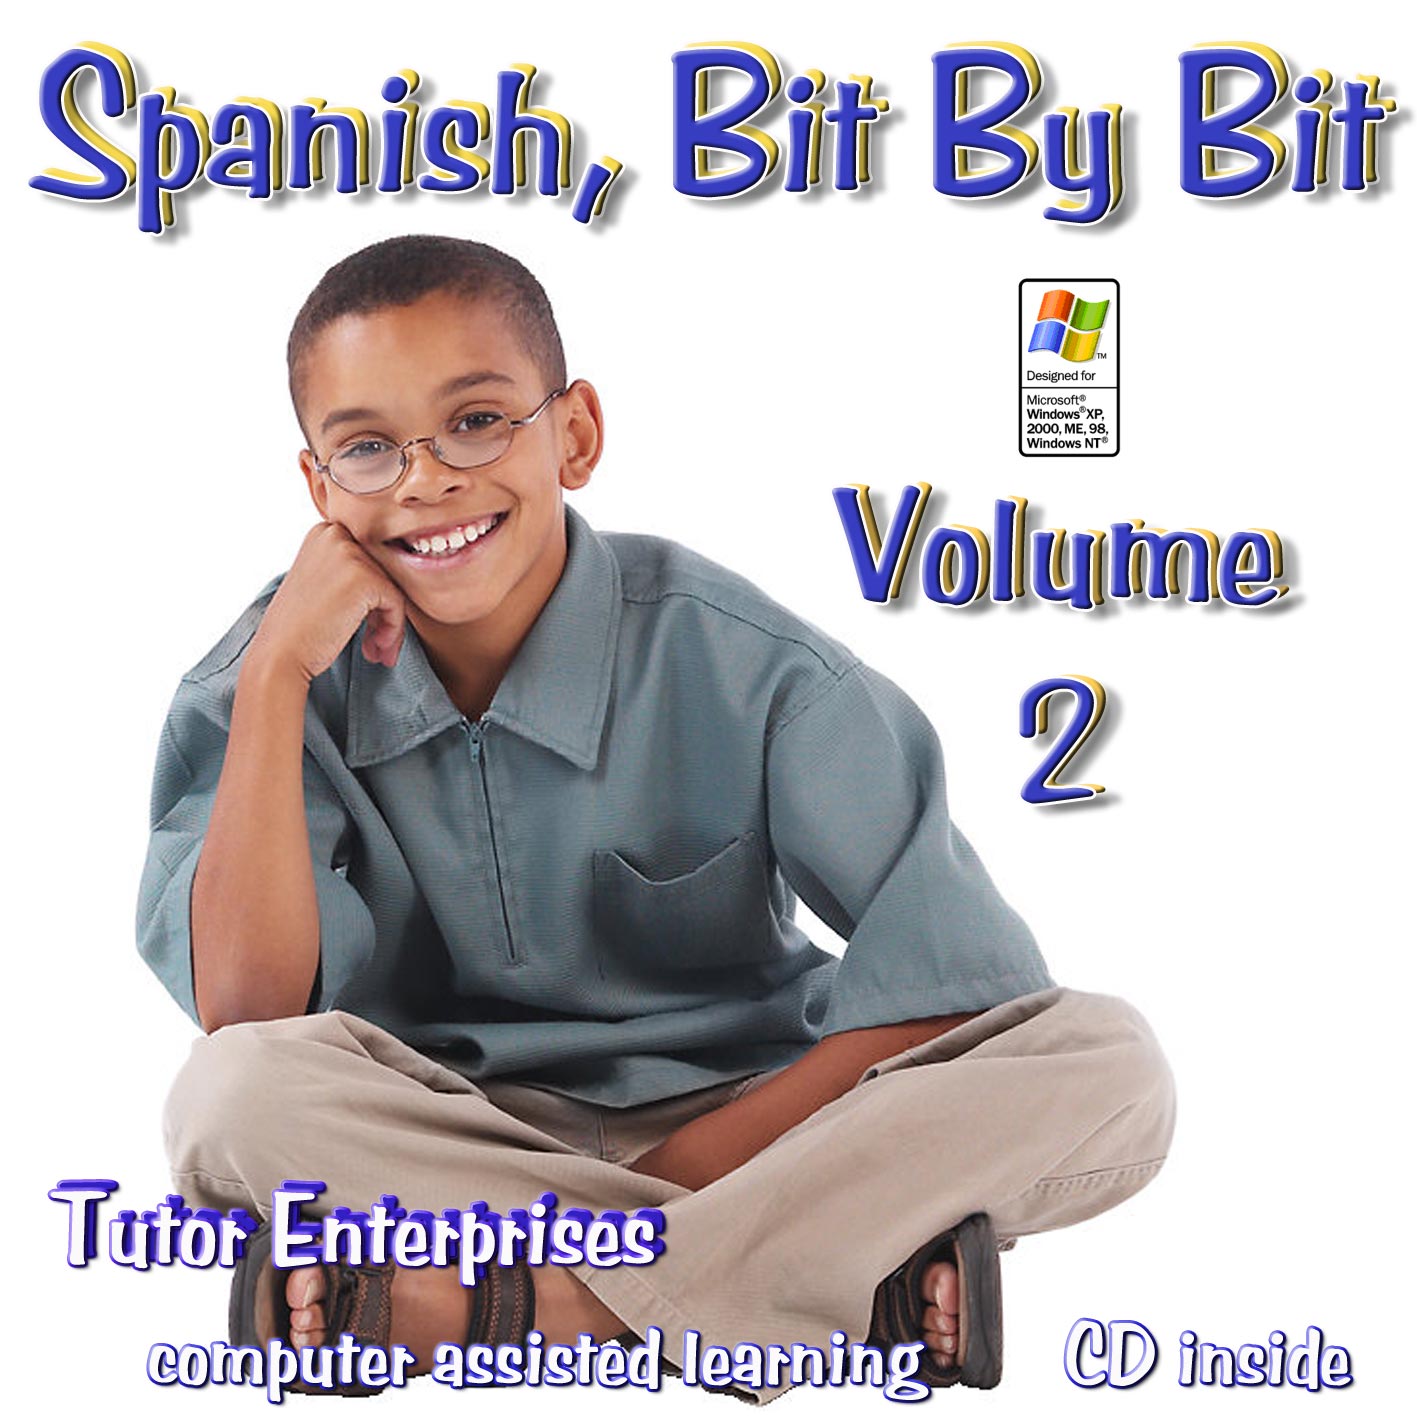 Software for learning Spanish Vol 2 beginner middle/high school to adult with lessons, exercises, pictures, voices, bilingual spoken dictionary only $19.99 for use on single computer. Classroom or laboratory or school licenses available. Reproducible workbook available. Click for details.